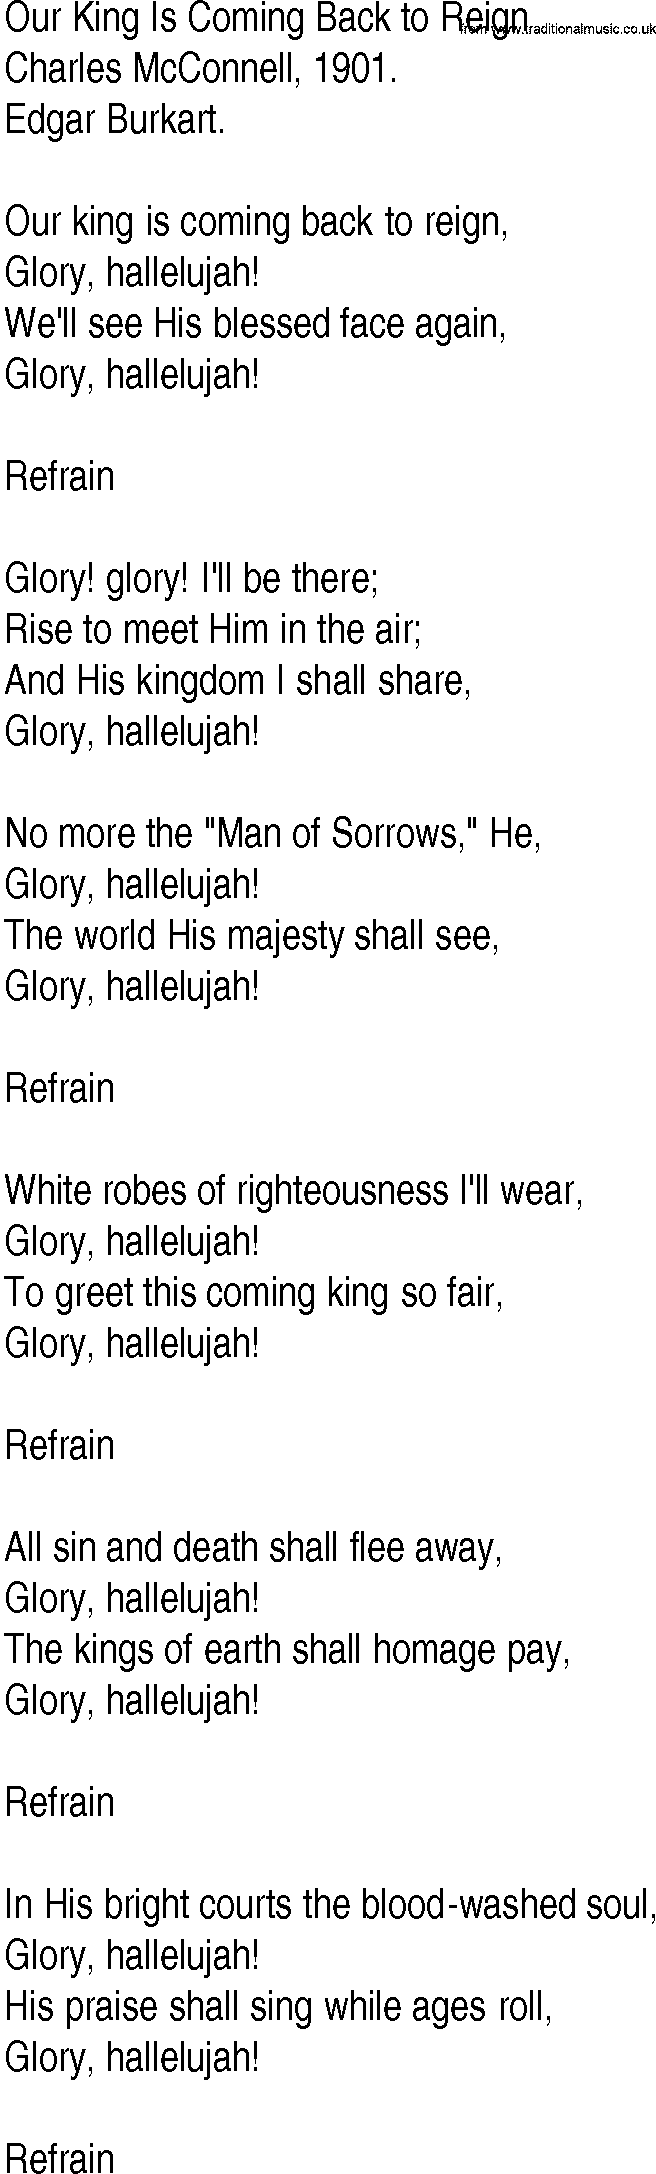 Hymn and Gospel Song: Our King Is Coming Back to Reign by Charles McConnell lyrics